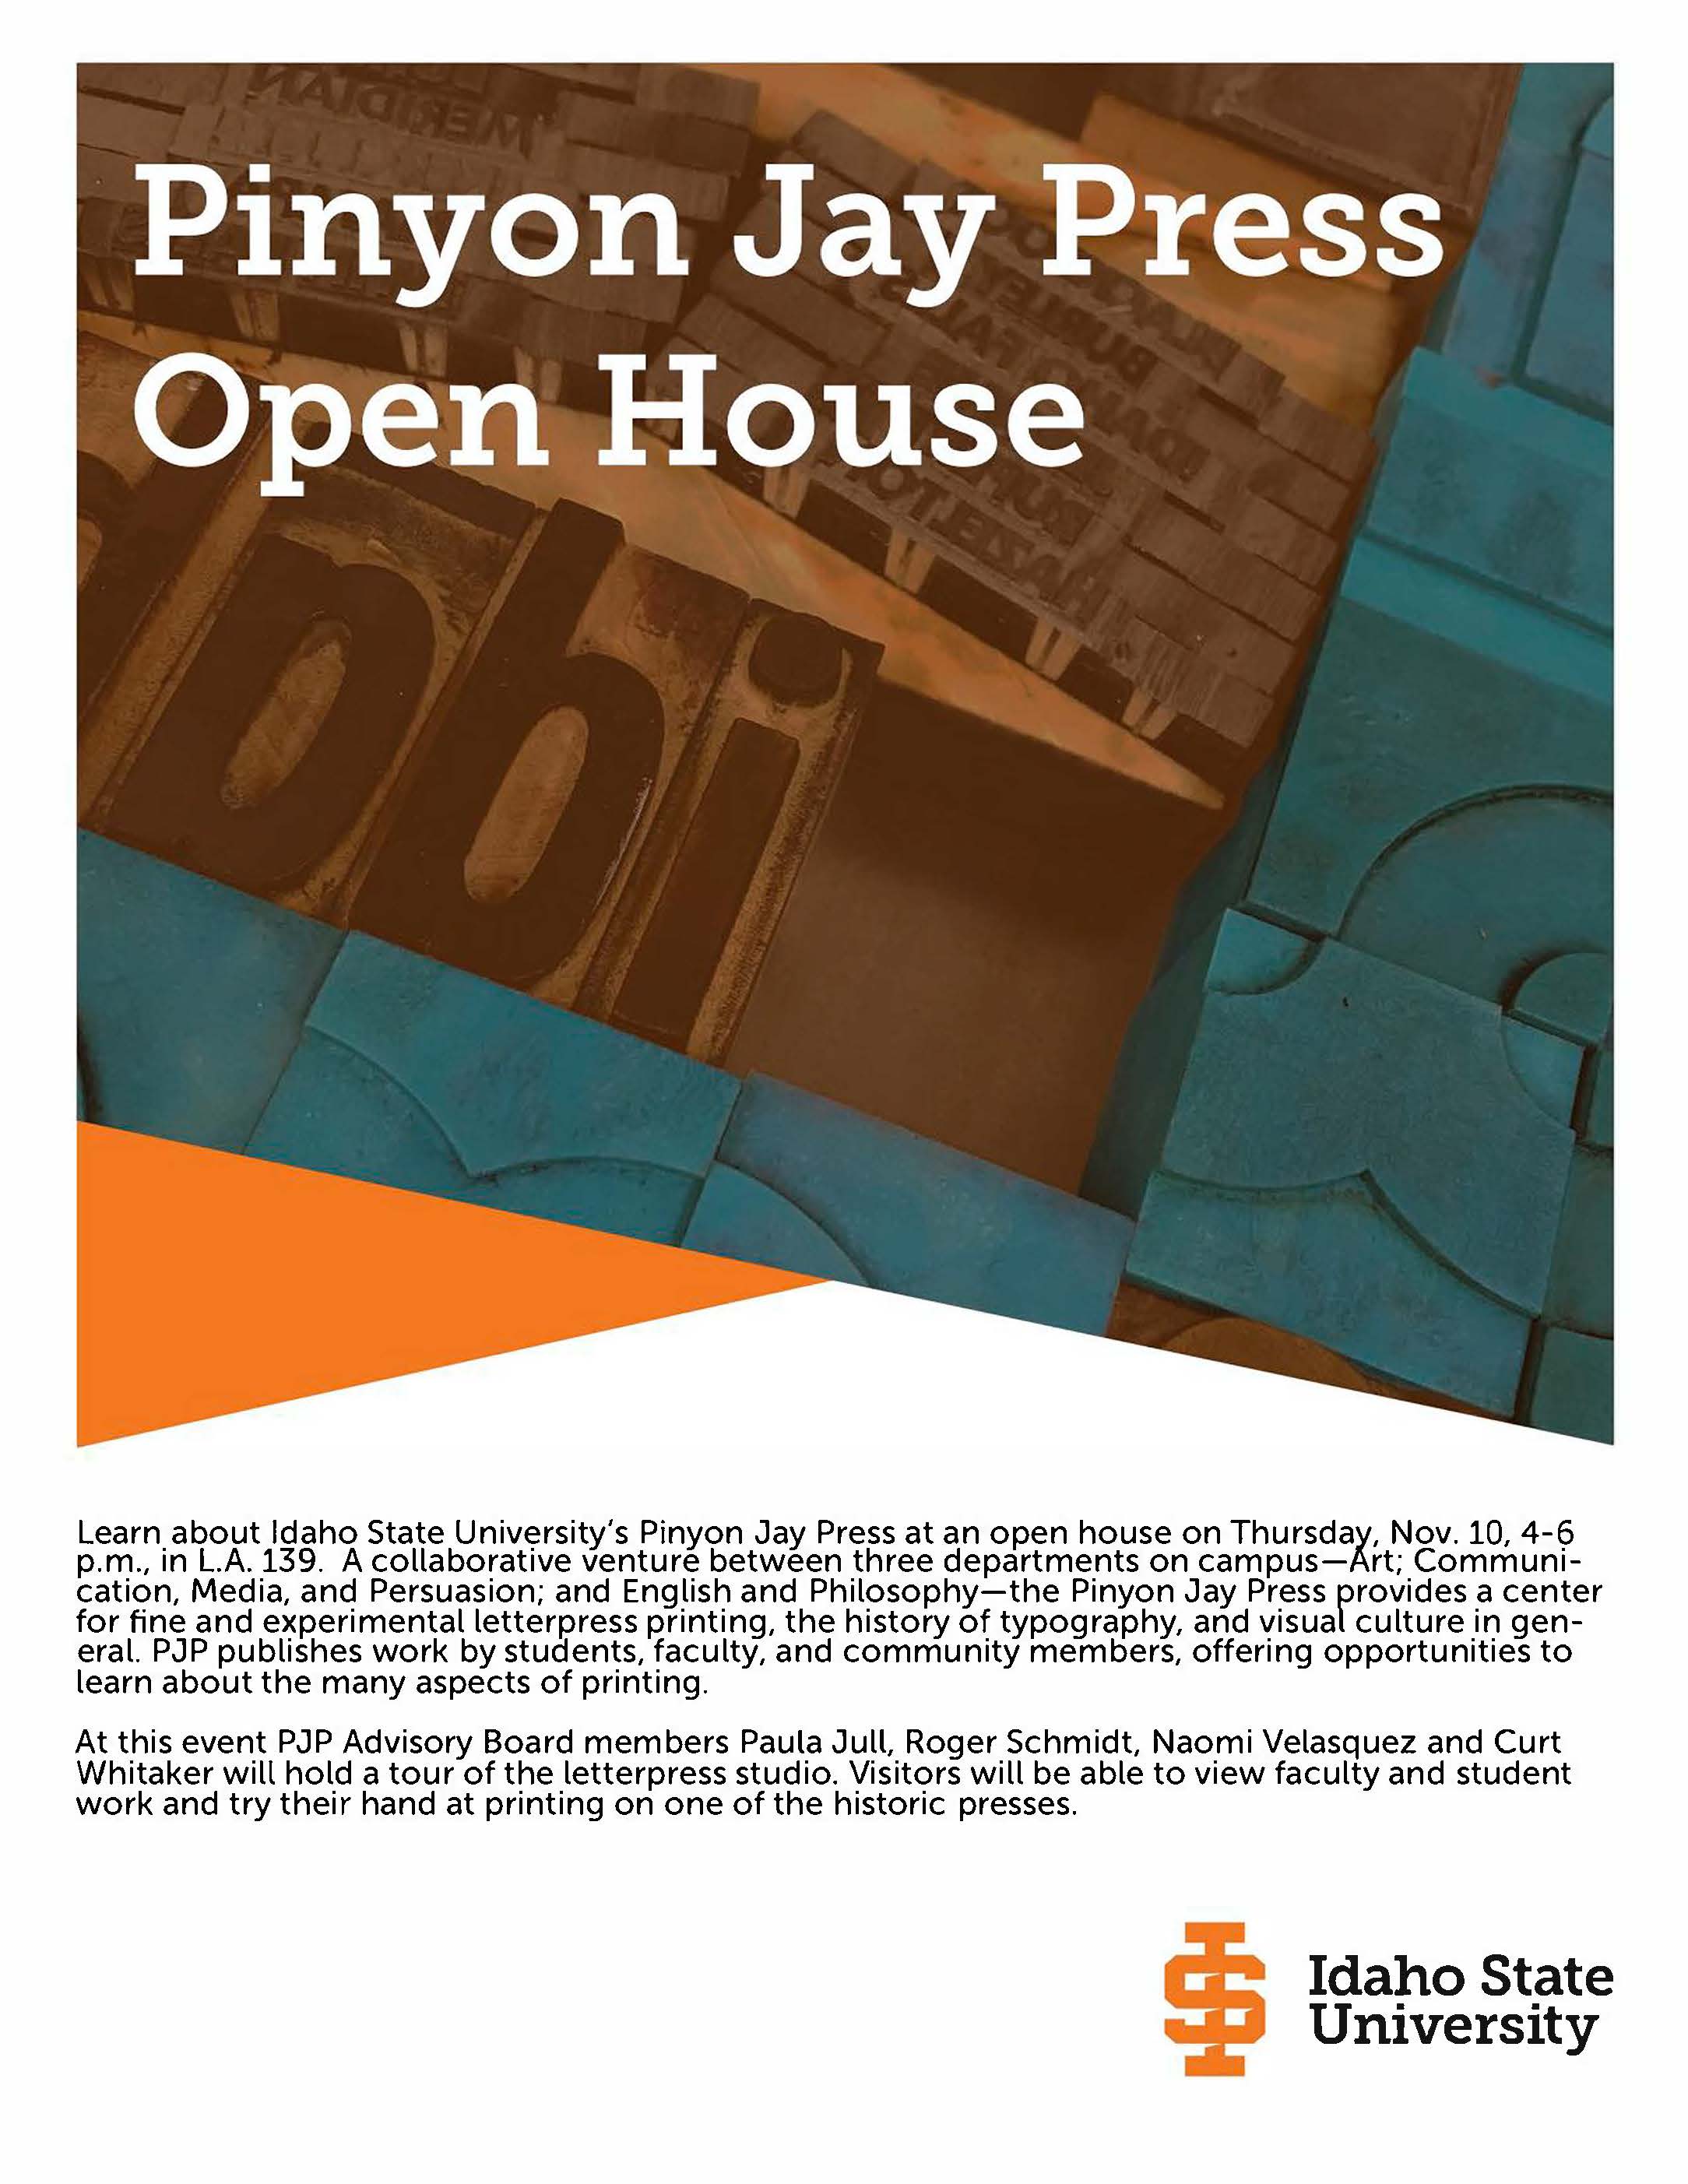 Fall 2022 open house